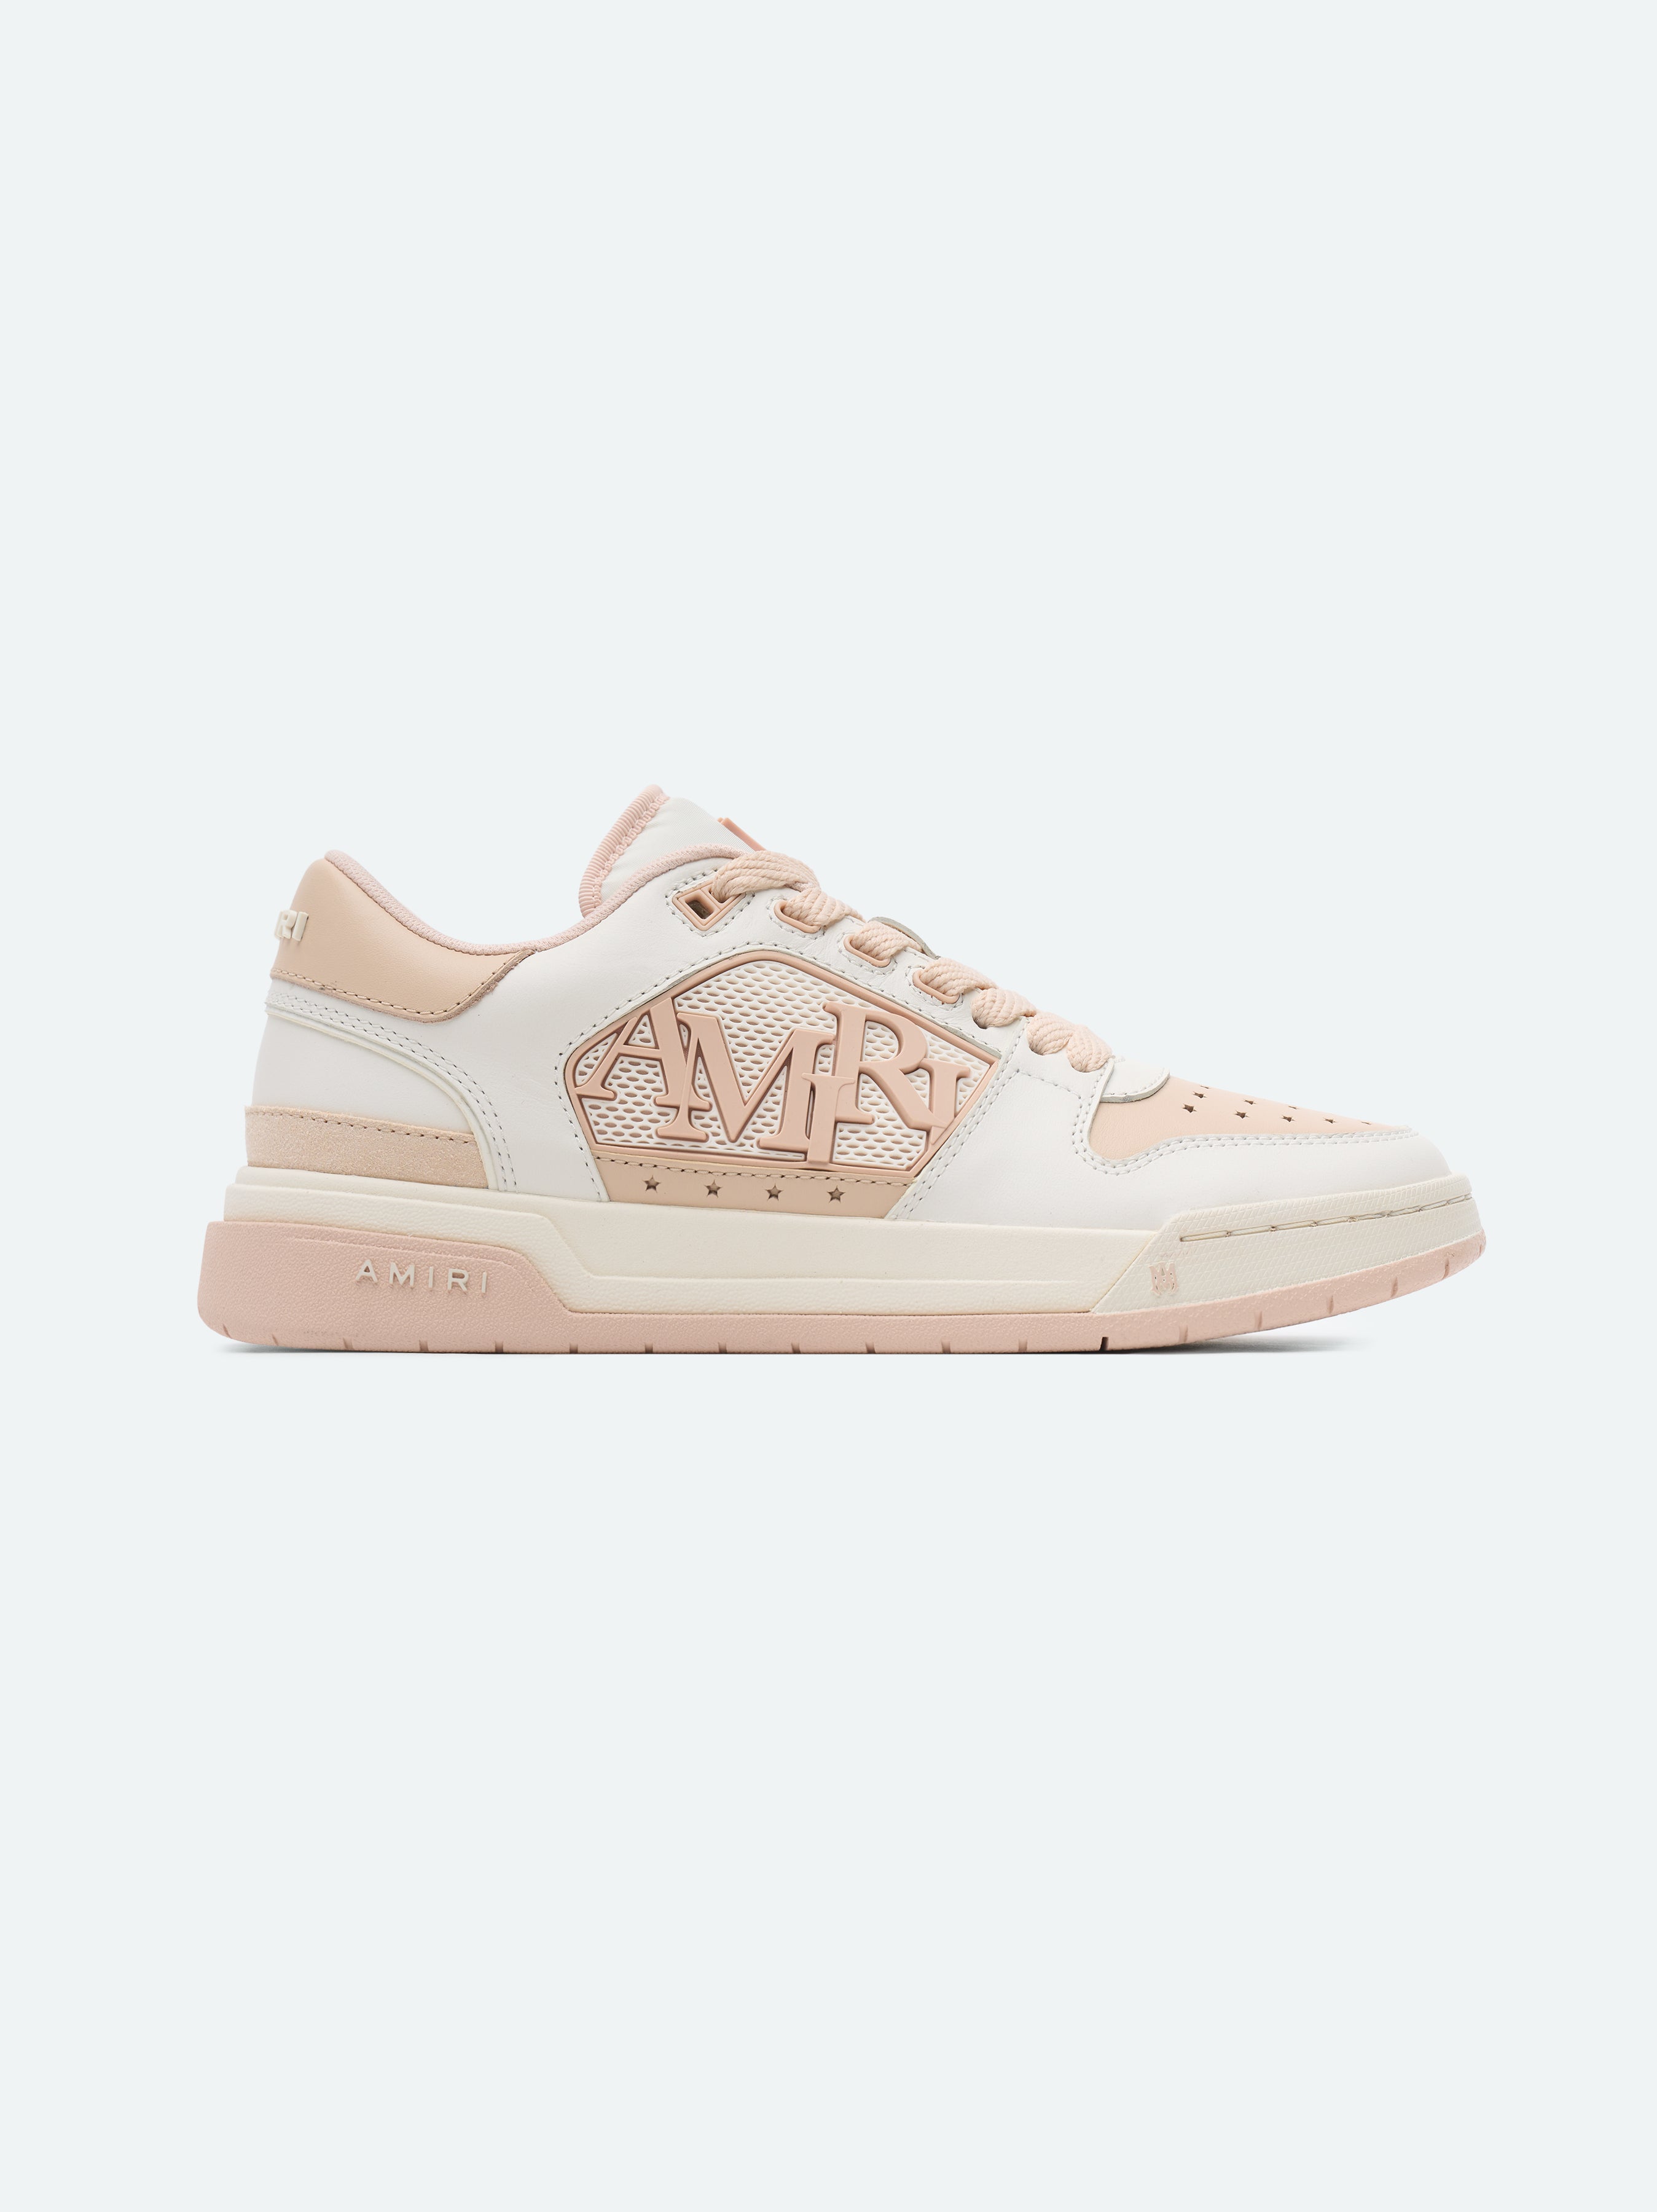 Product WOMEN - WOMEN'S CLASSIC LOW - White Pink featured image